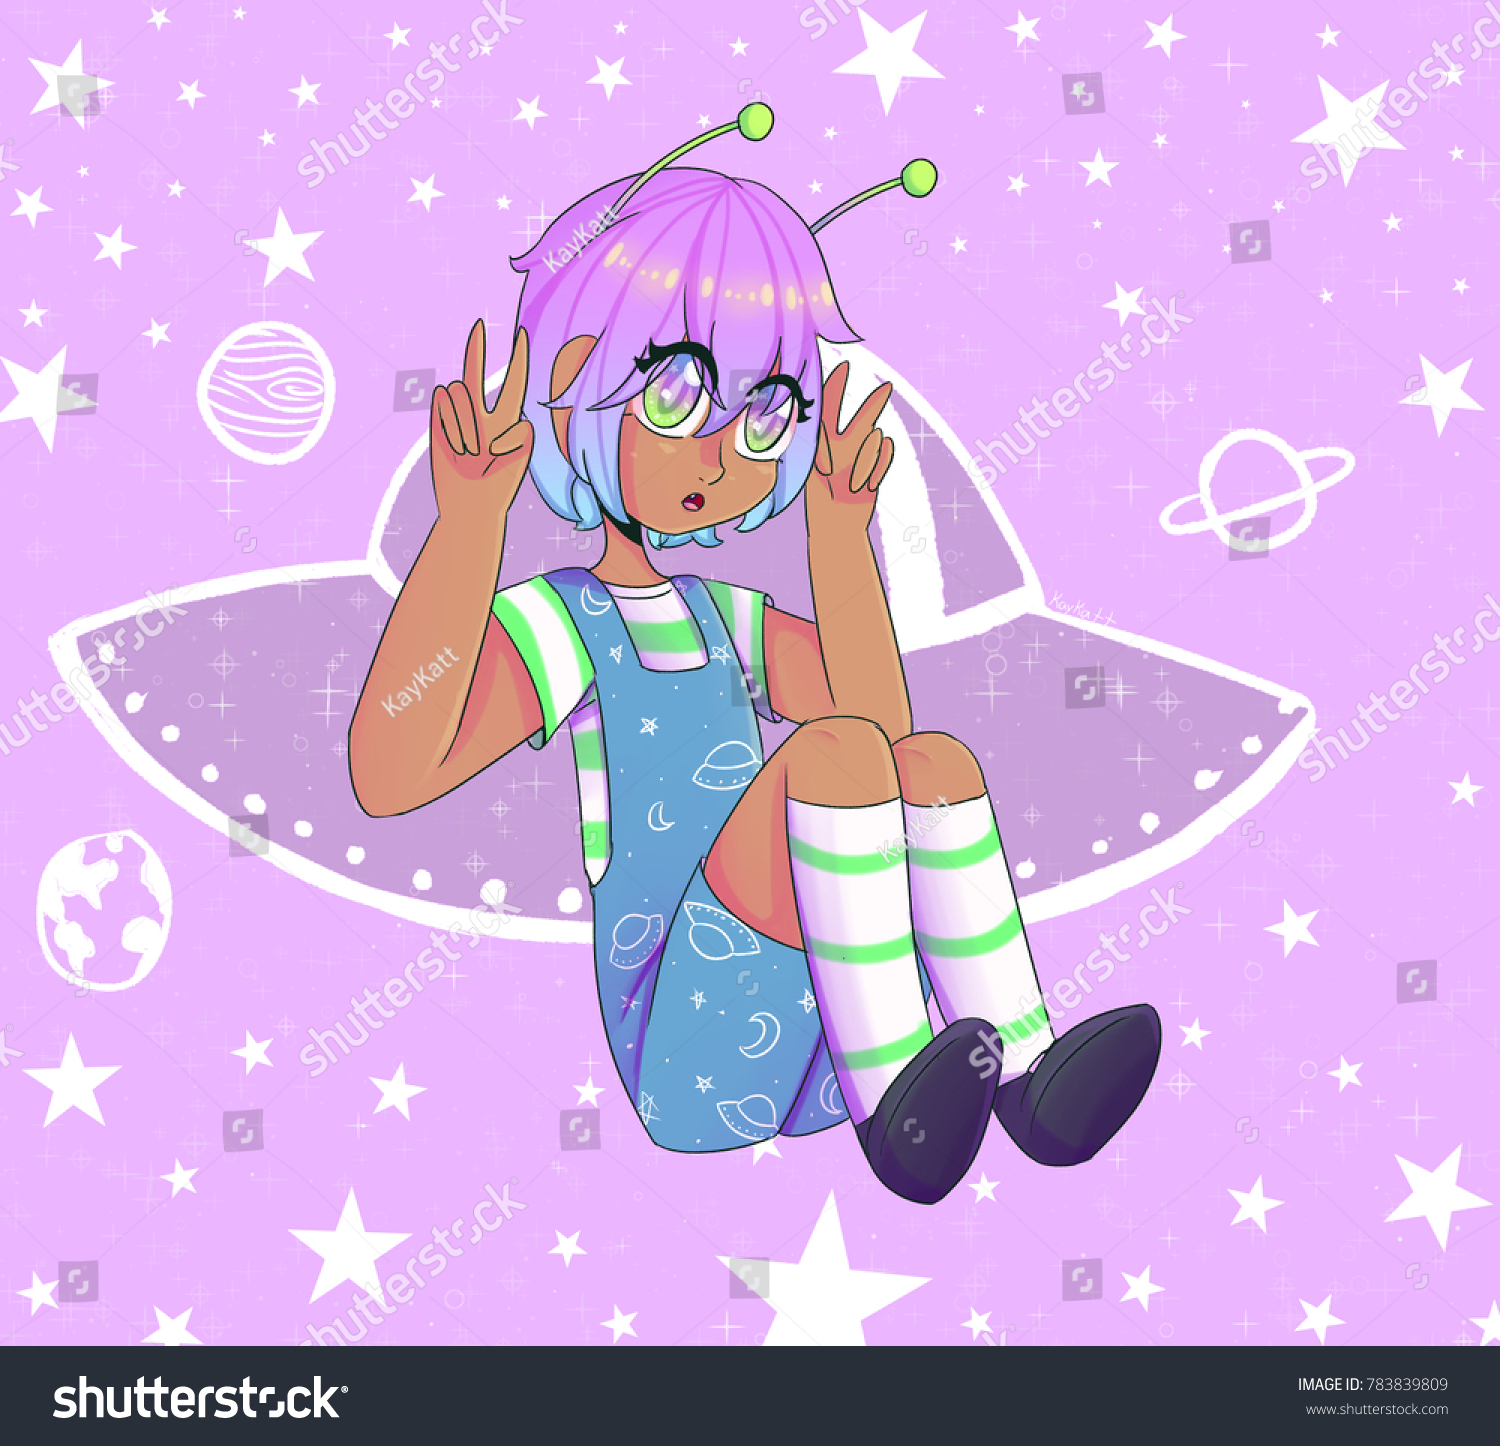 angelina guerrero recommends alien anime girl pic